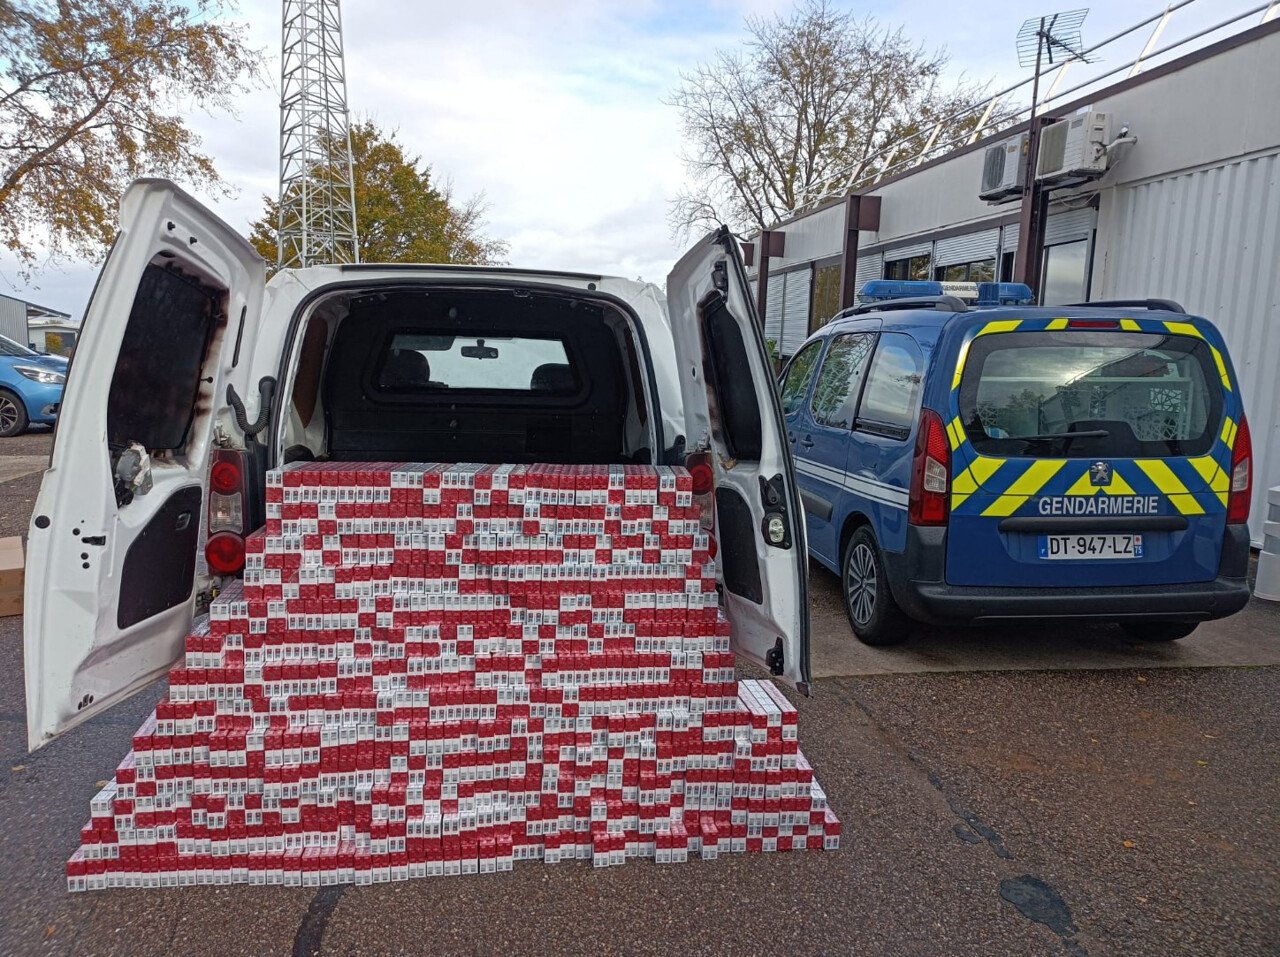 A 21-year-old motorist was arrested in possession of 450 cartons of contraband at the Neuves-Maisons exit in Meurthe-et-Moselle.